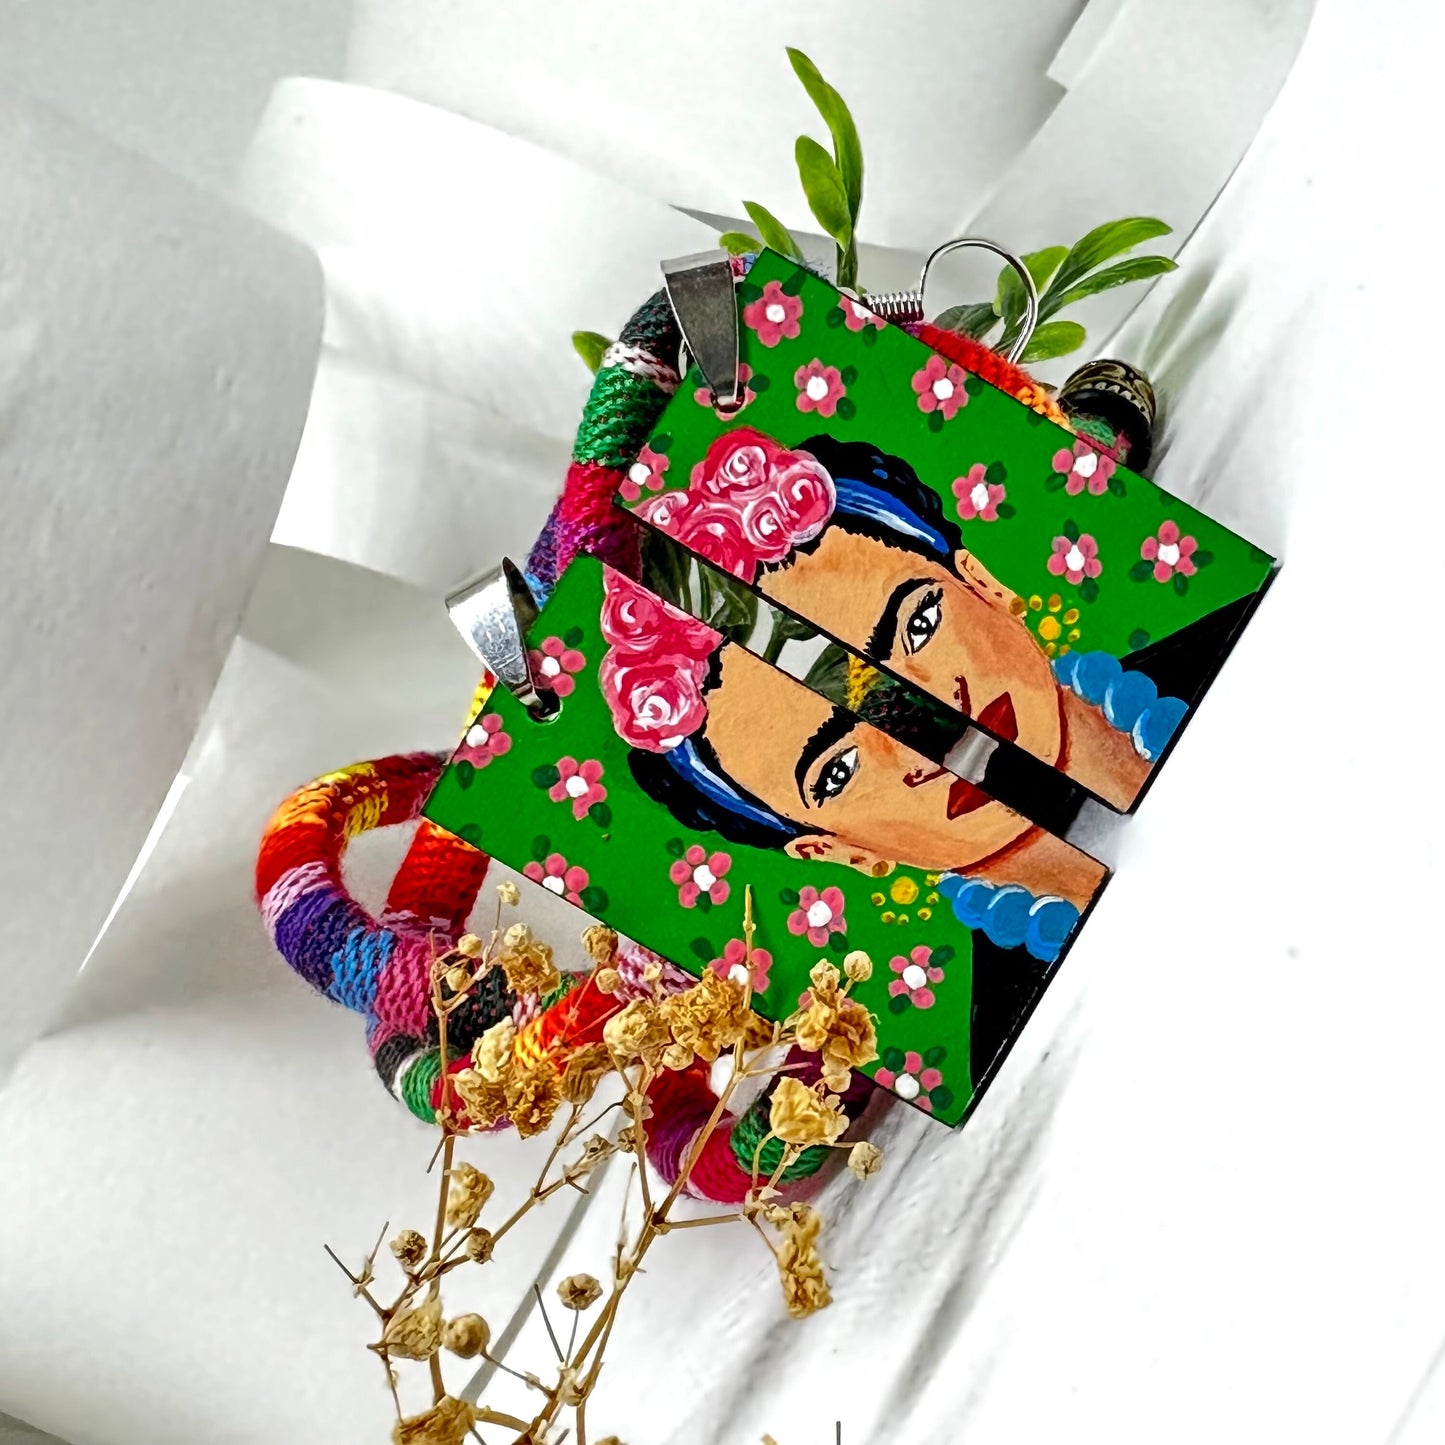 Cool Frida Inspired Earrings Hand Painted Artfully Designed Mexican Jewelry Mexico Folk Art to Wear Wooden Rectangular Asymmetrical Earrings